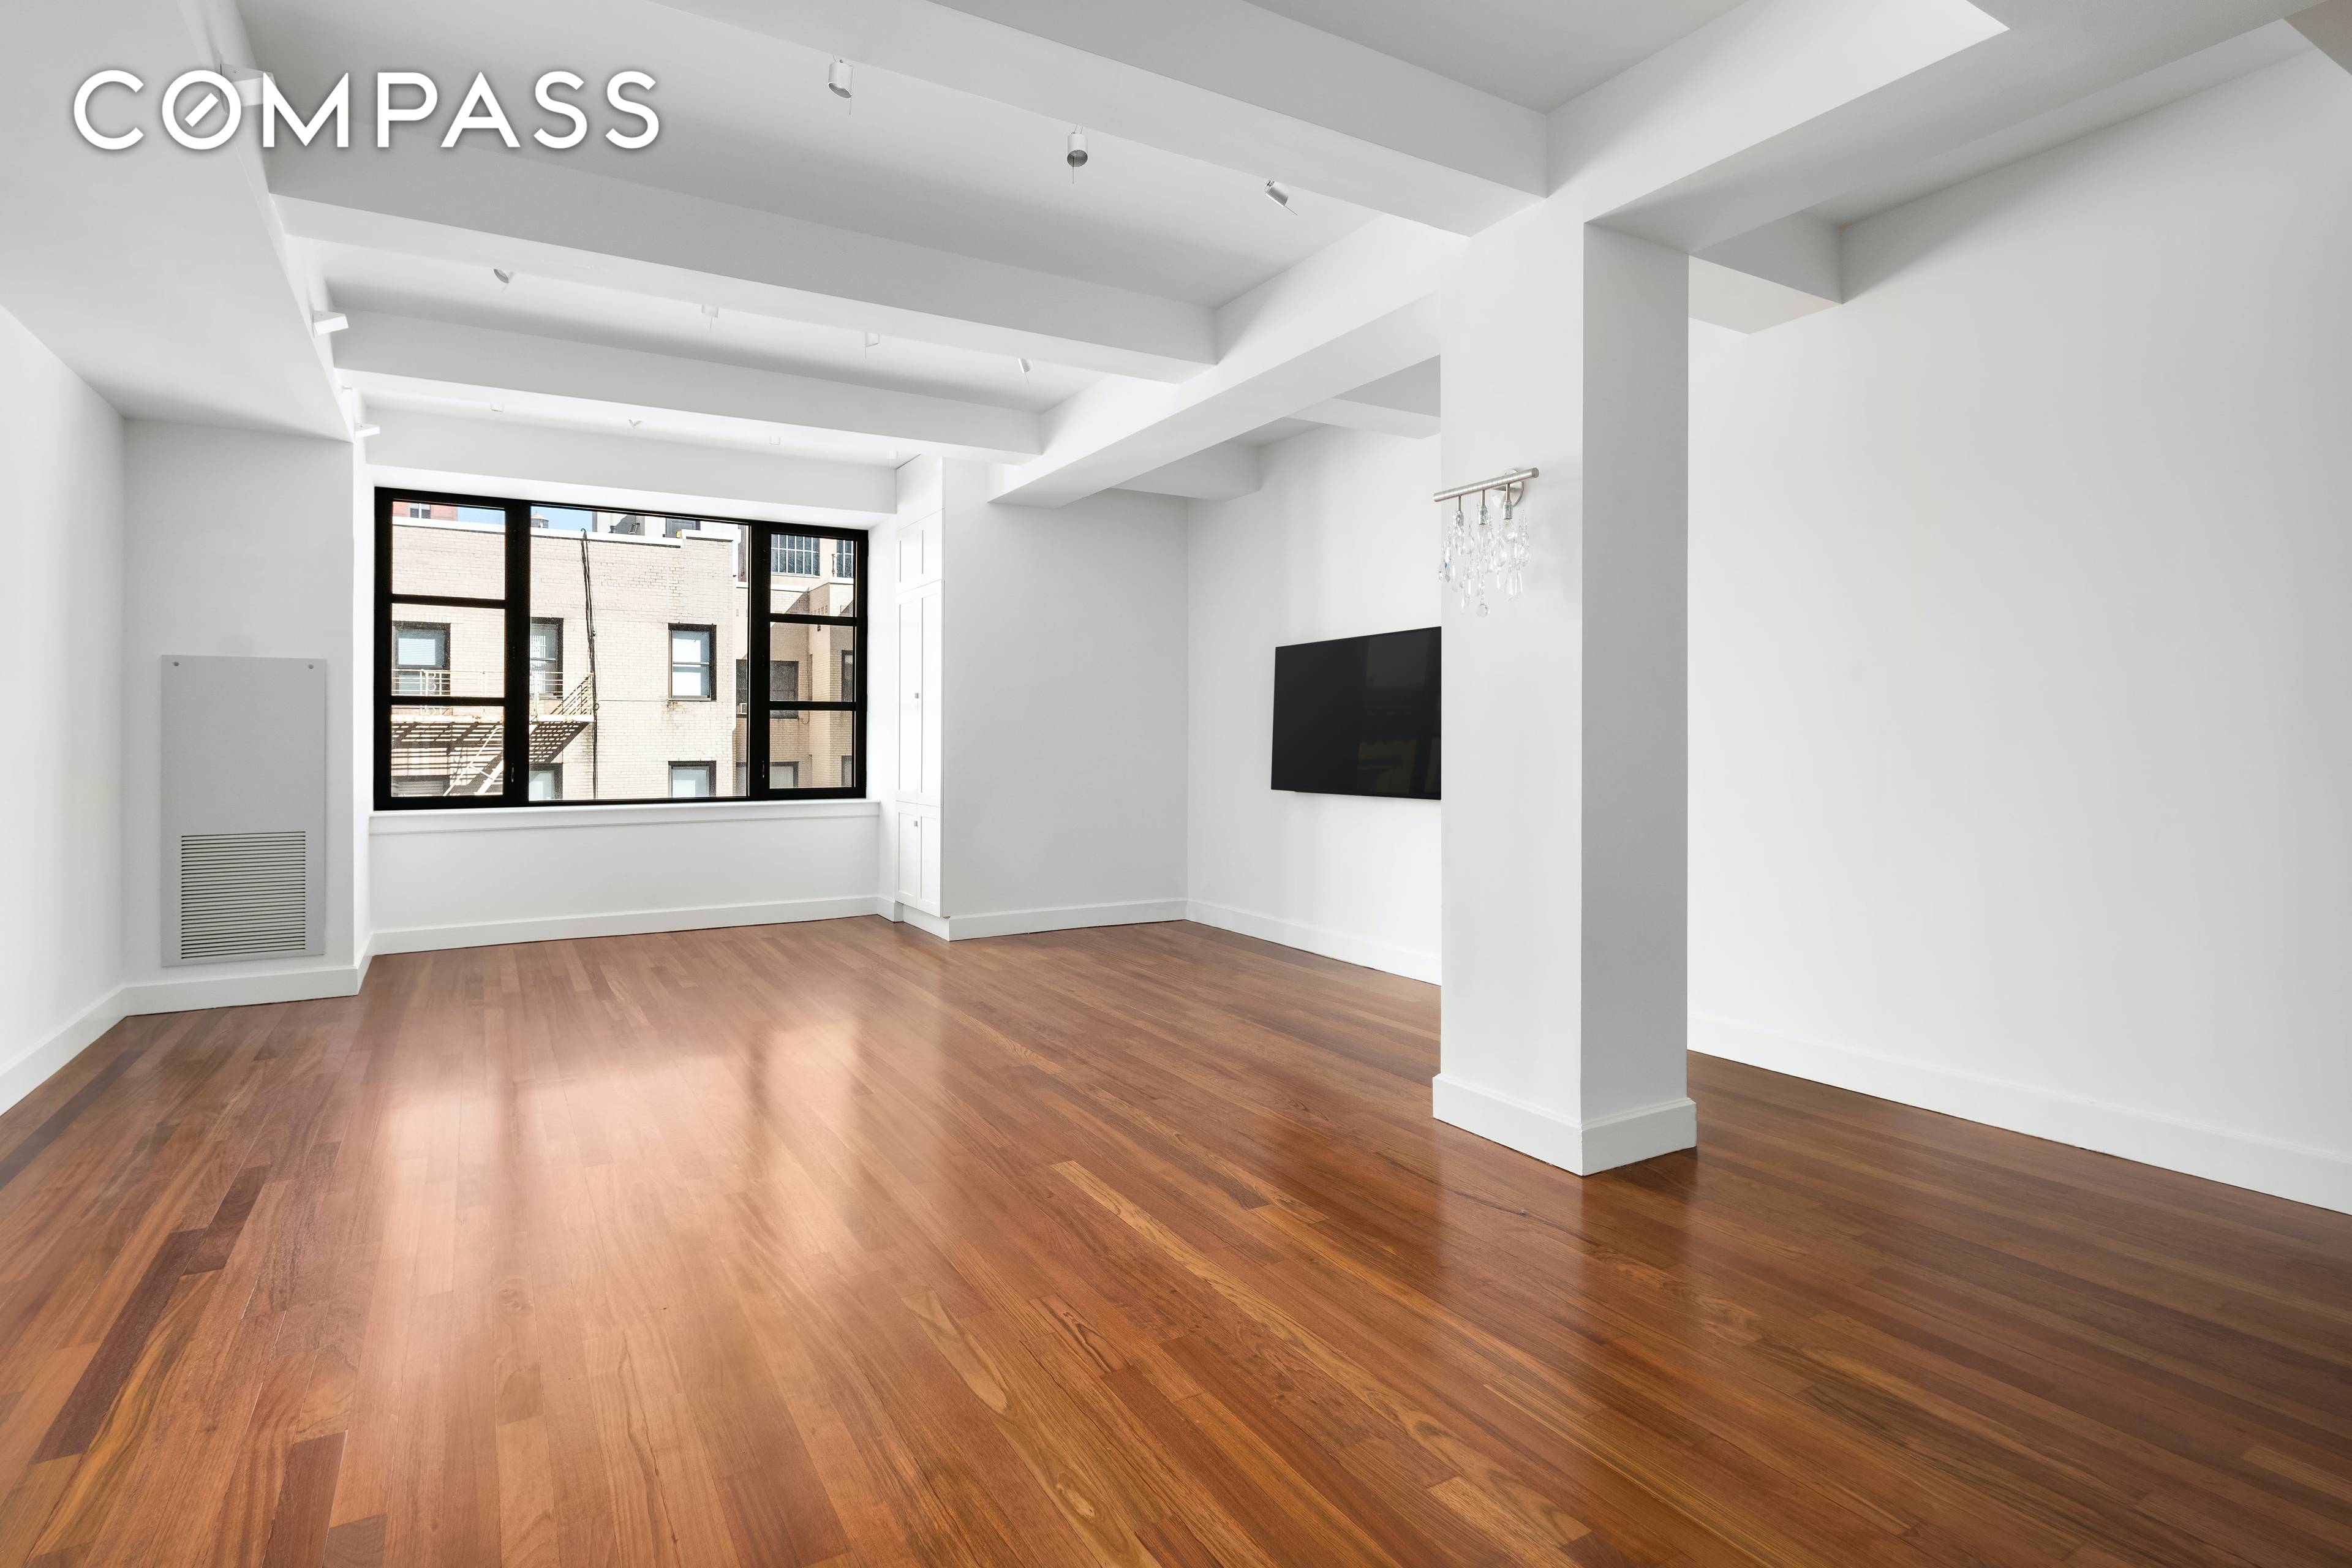 Located on the serene block of West 64th street that runs between Central Park West and Lincoln Center, this lavish mint condition three bedroom, three and a half bath home ...